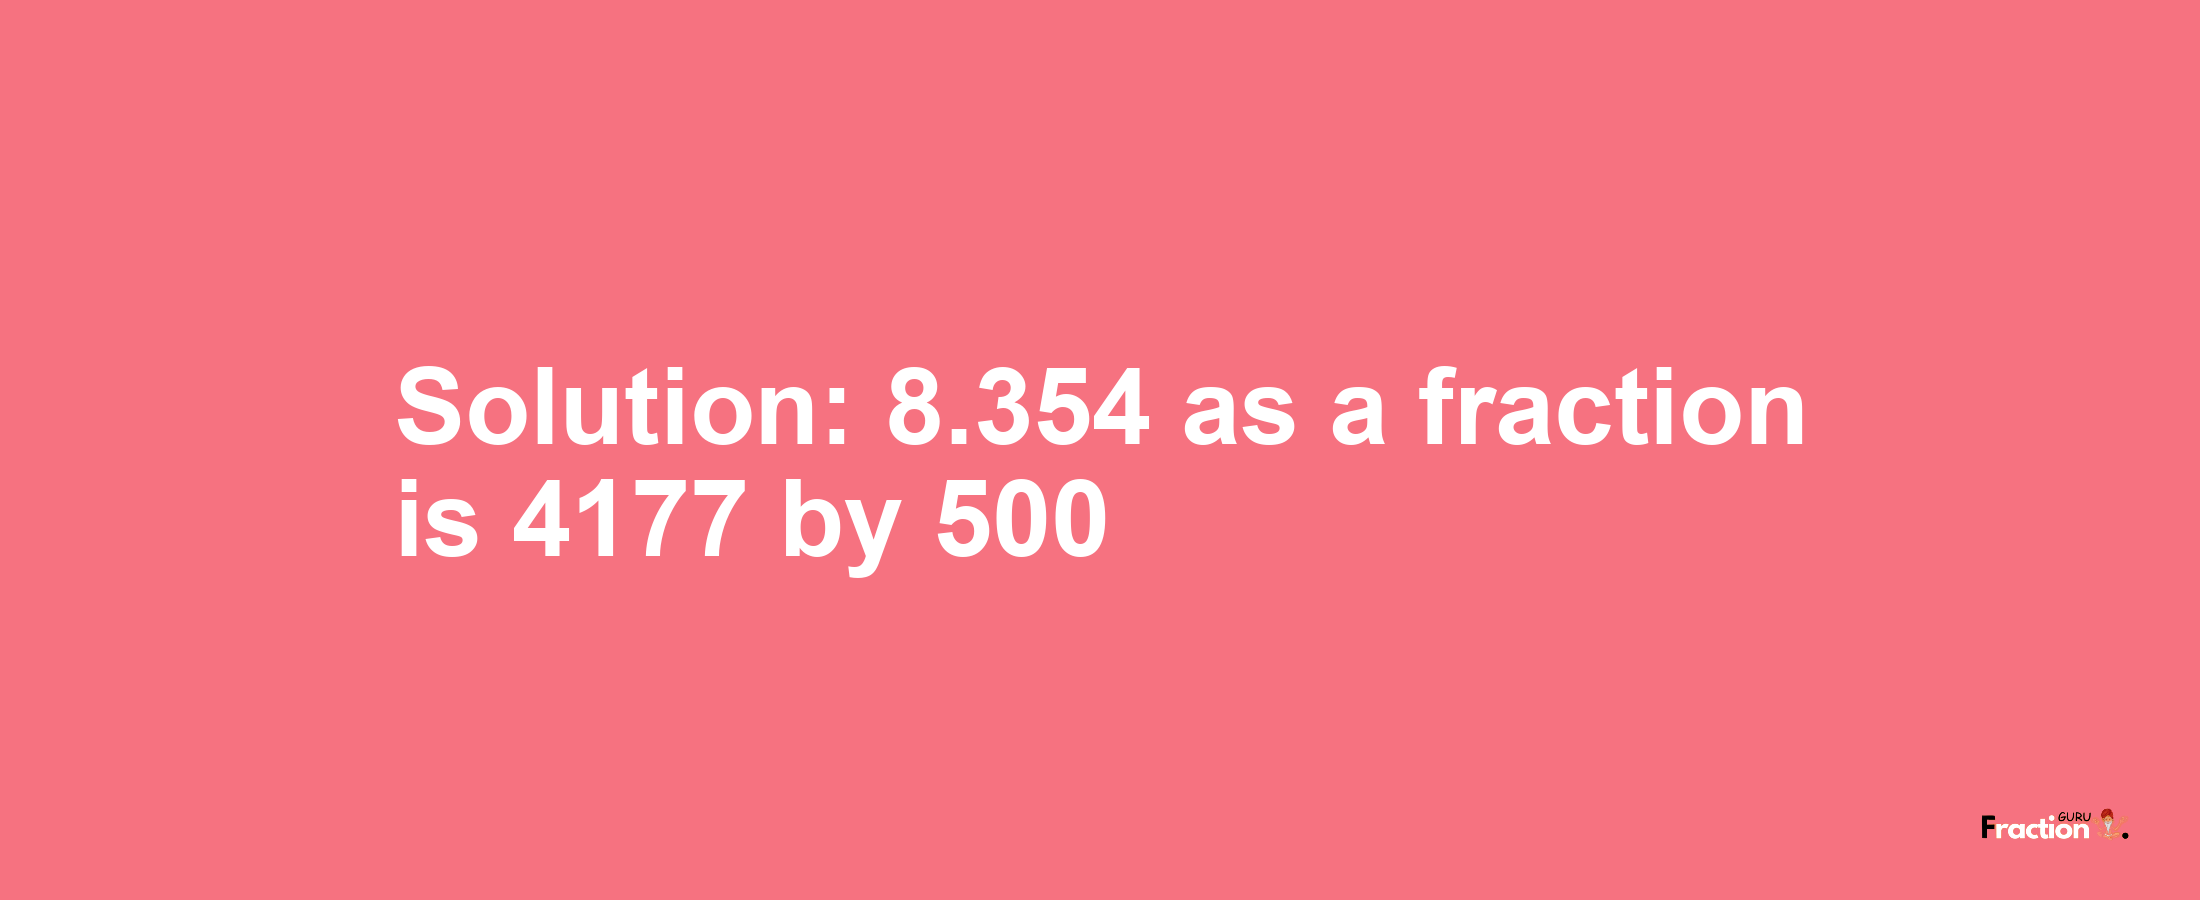 Solution:8.354 as a fraction is 4177/500